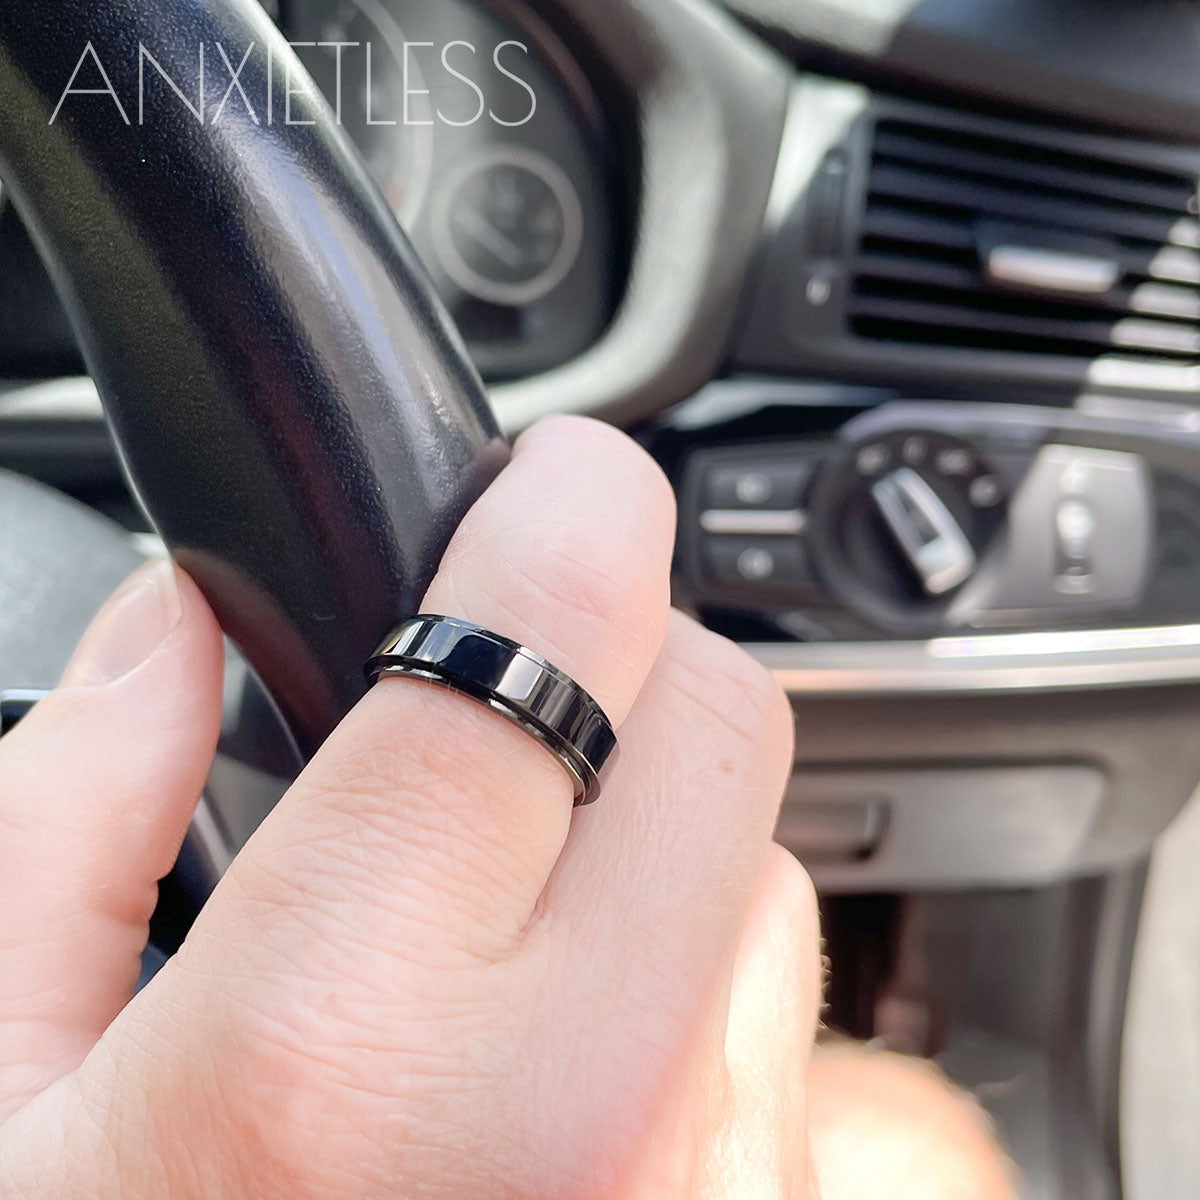 Man wearing a black fidget ring with a smooth polished design, holding onto a car steering wheel